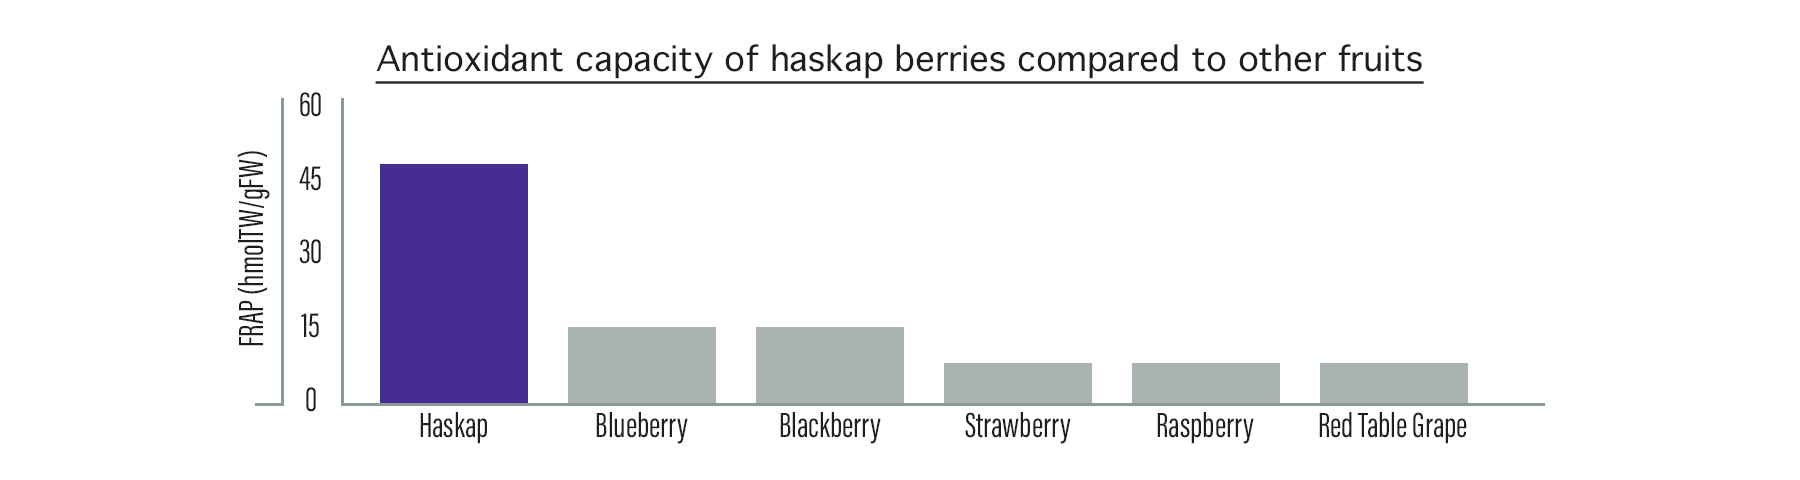 Antioxidant_bar_graph - capacity of haskap berries compared to other fruits, such as blueberry, blackberry, strawberry, raspberry, and red grapes